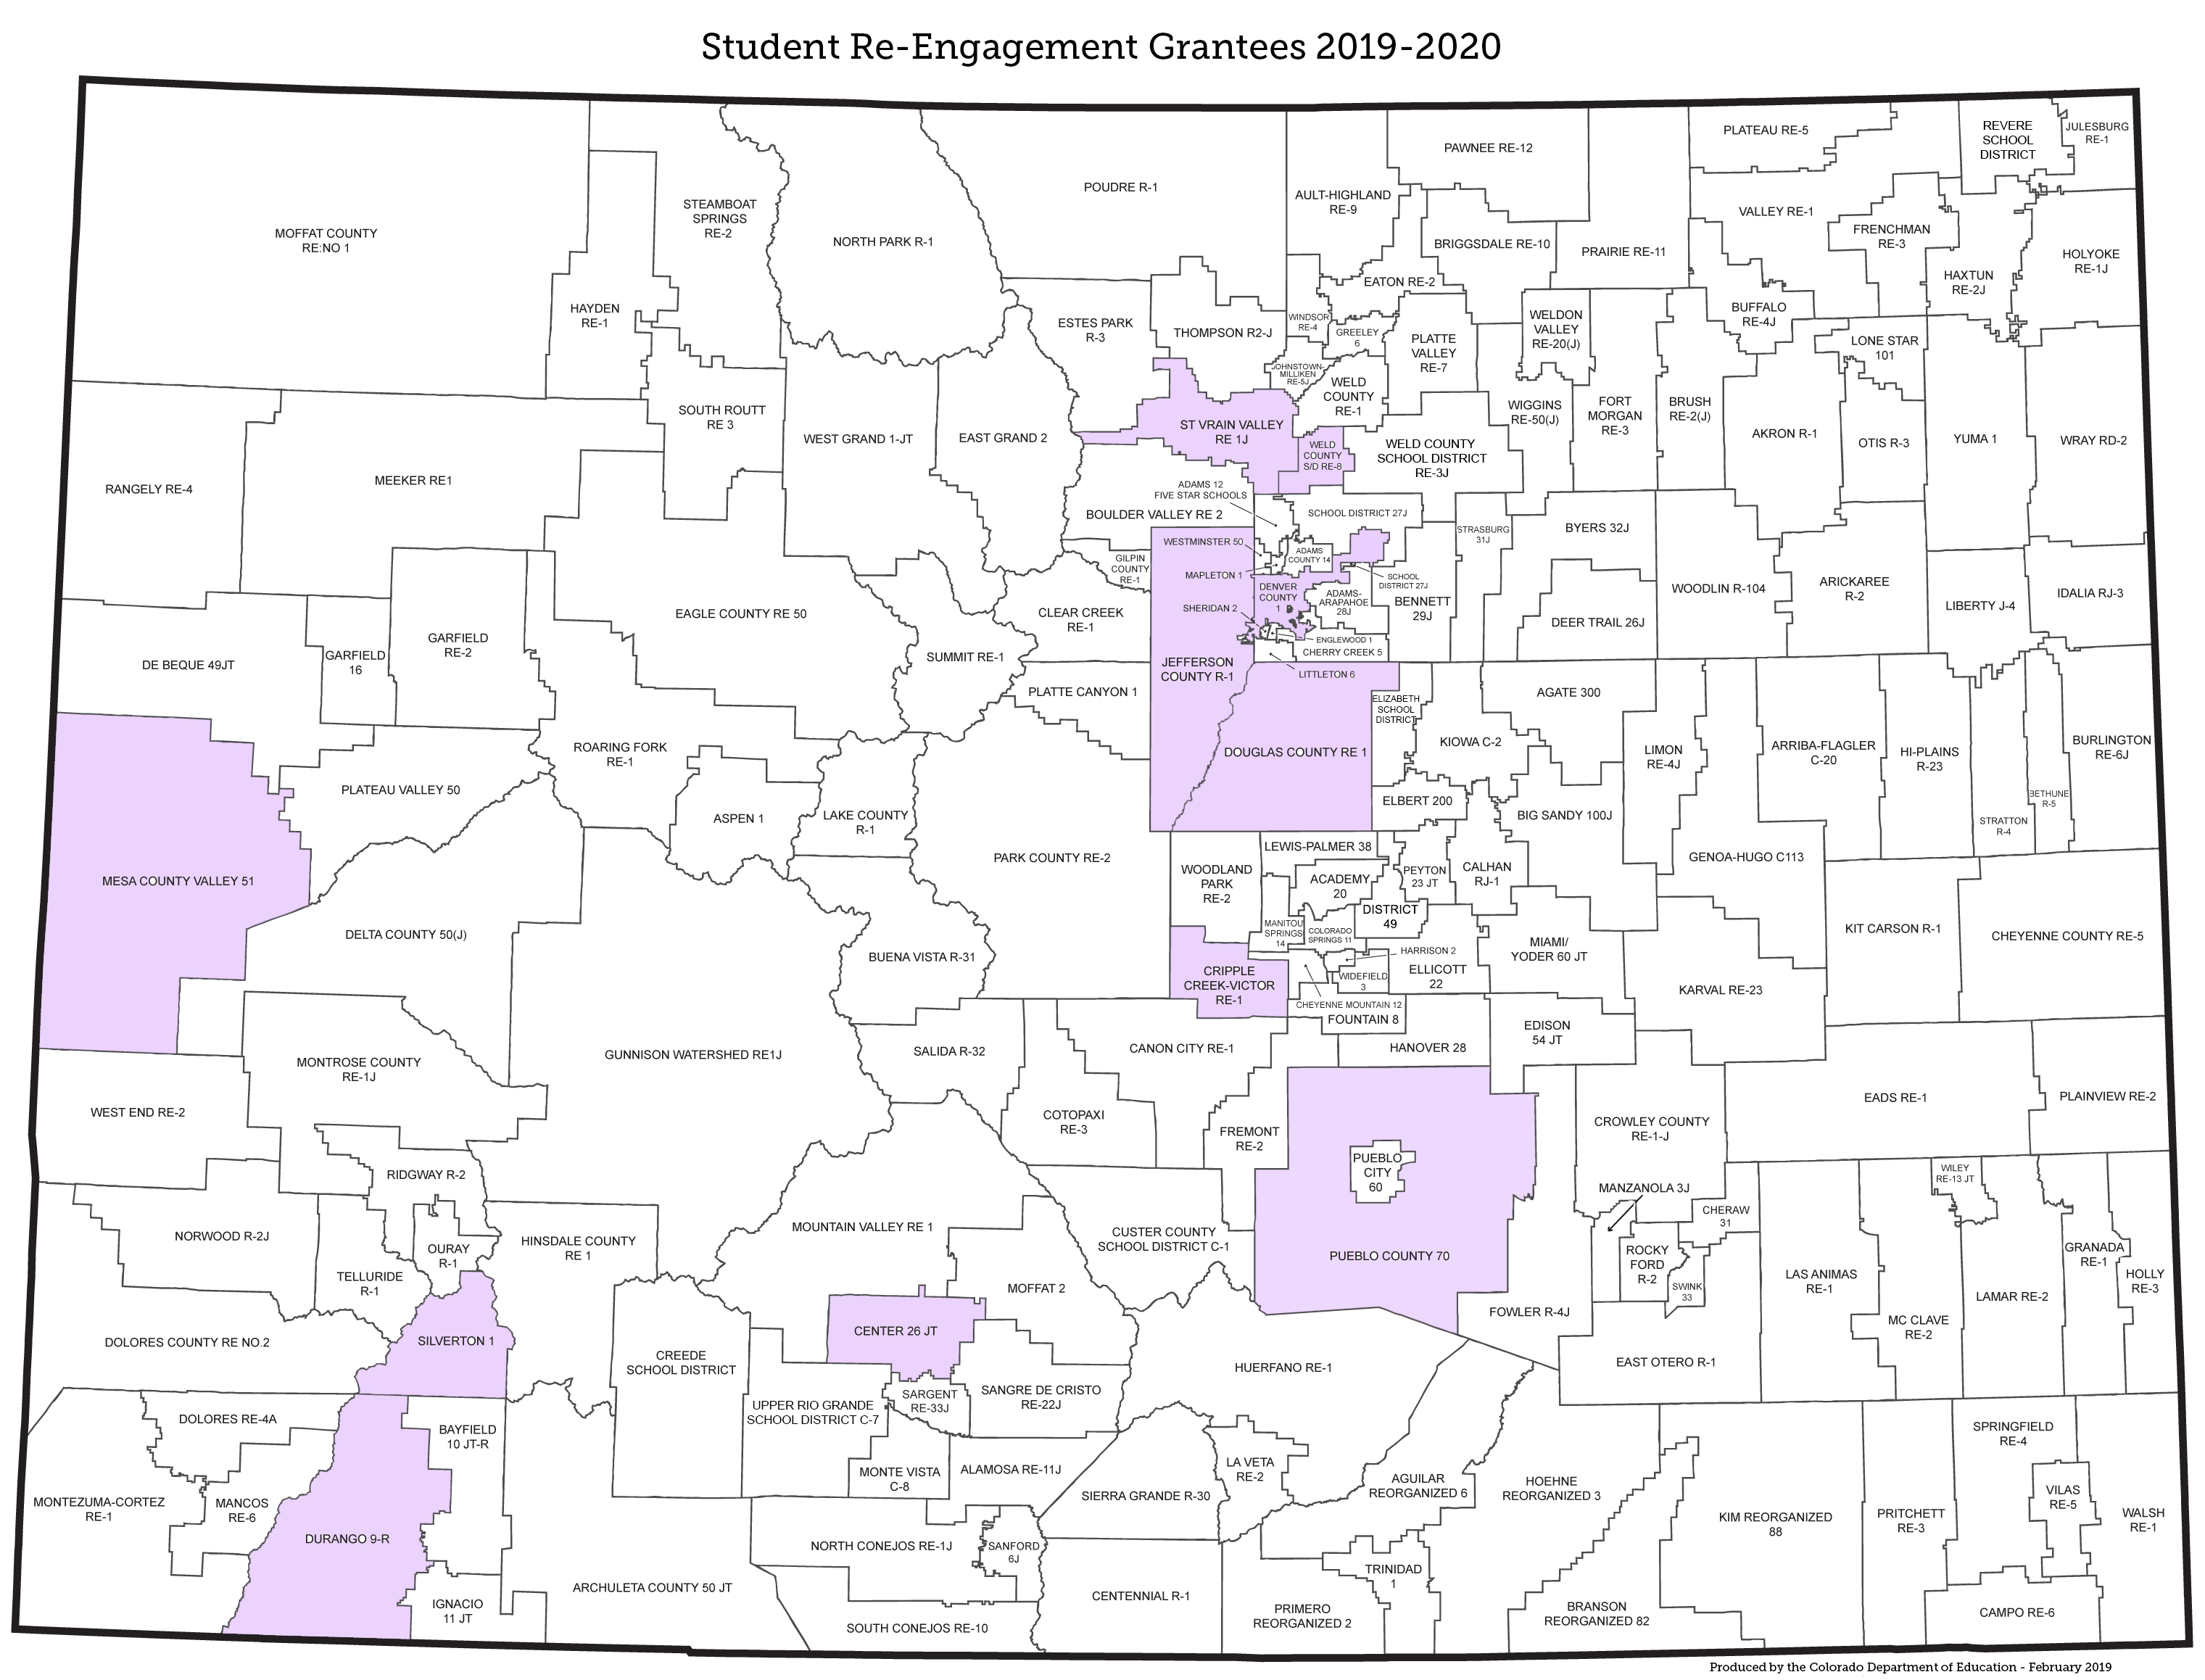 SRG 2019-2020 District Map